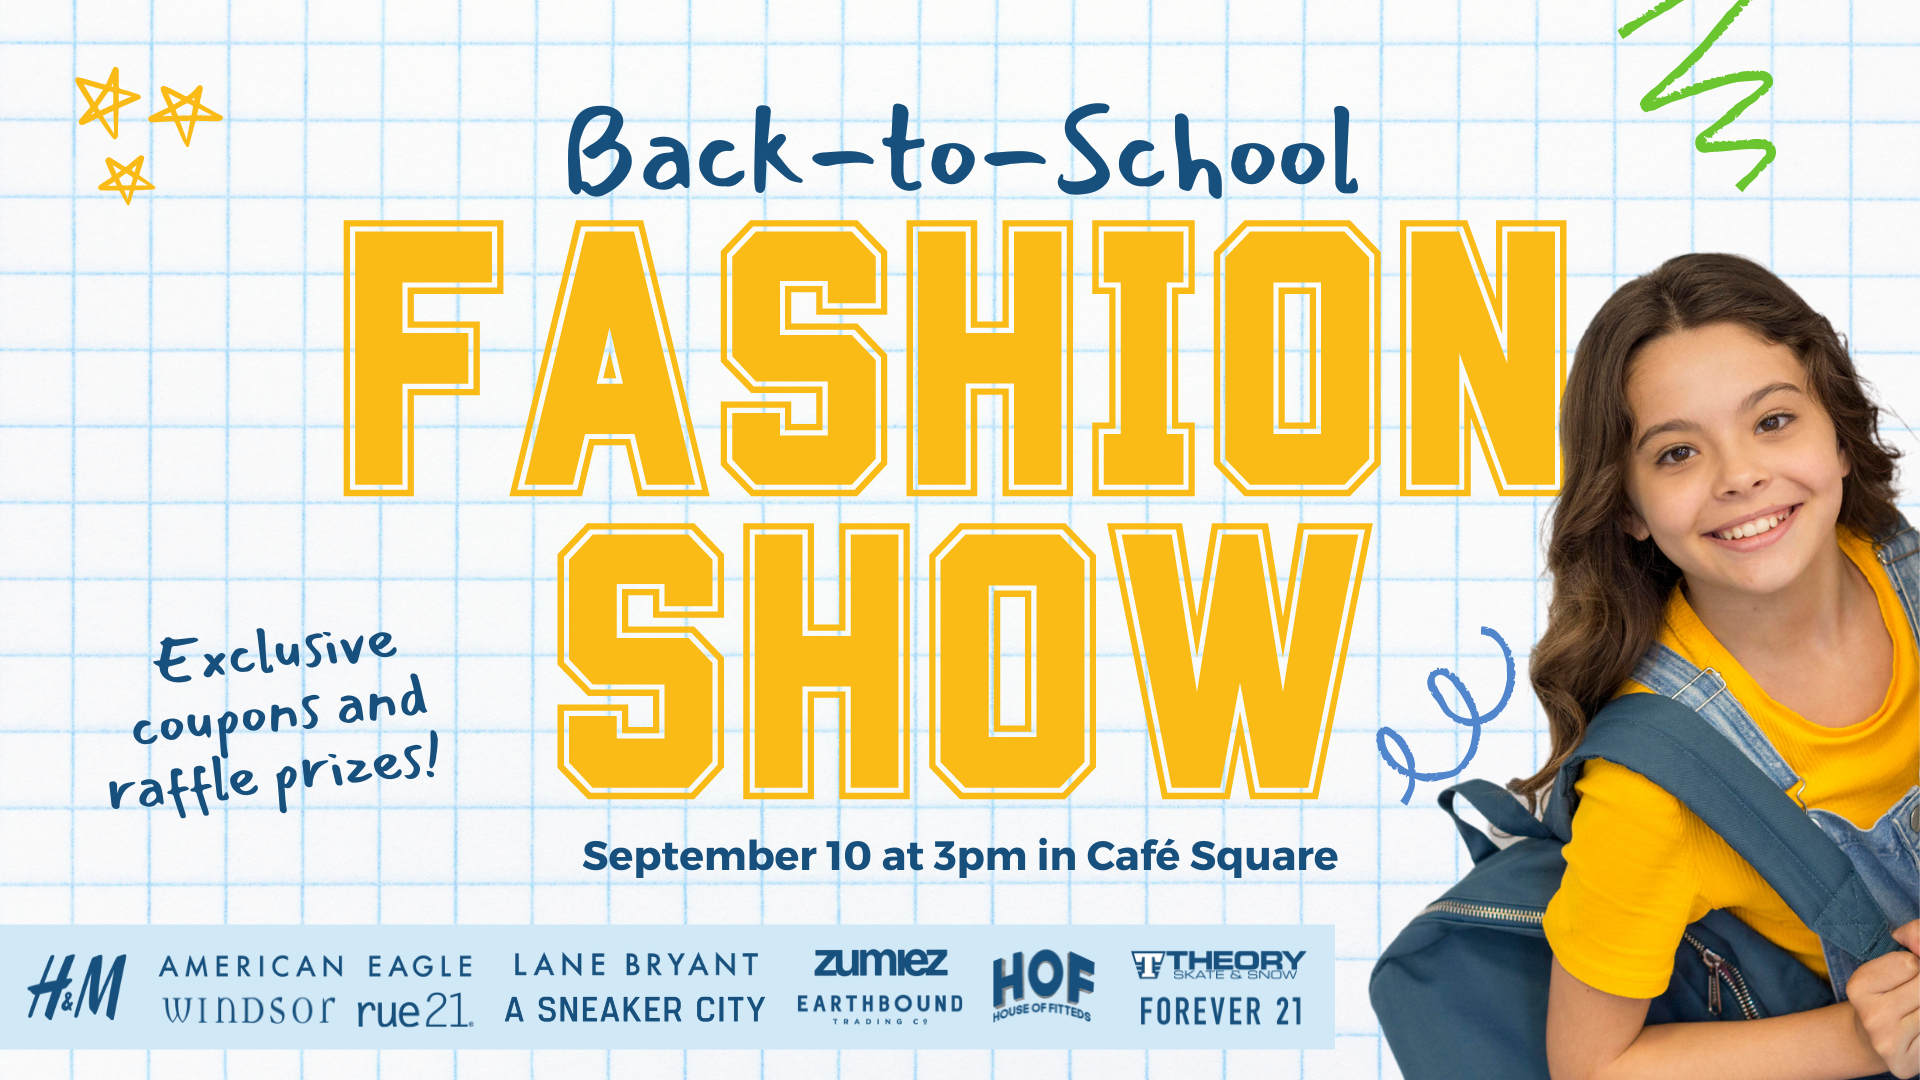 Holyoke Mall Back-to-School Fashion Show September 10 at 3PM in Café Square